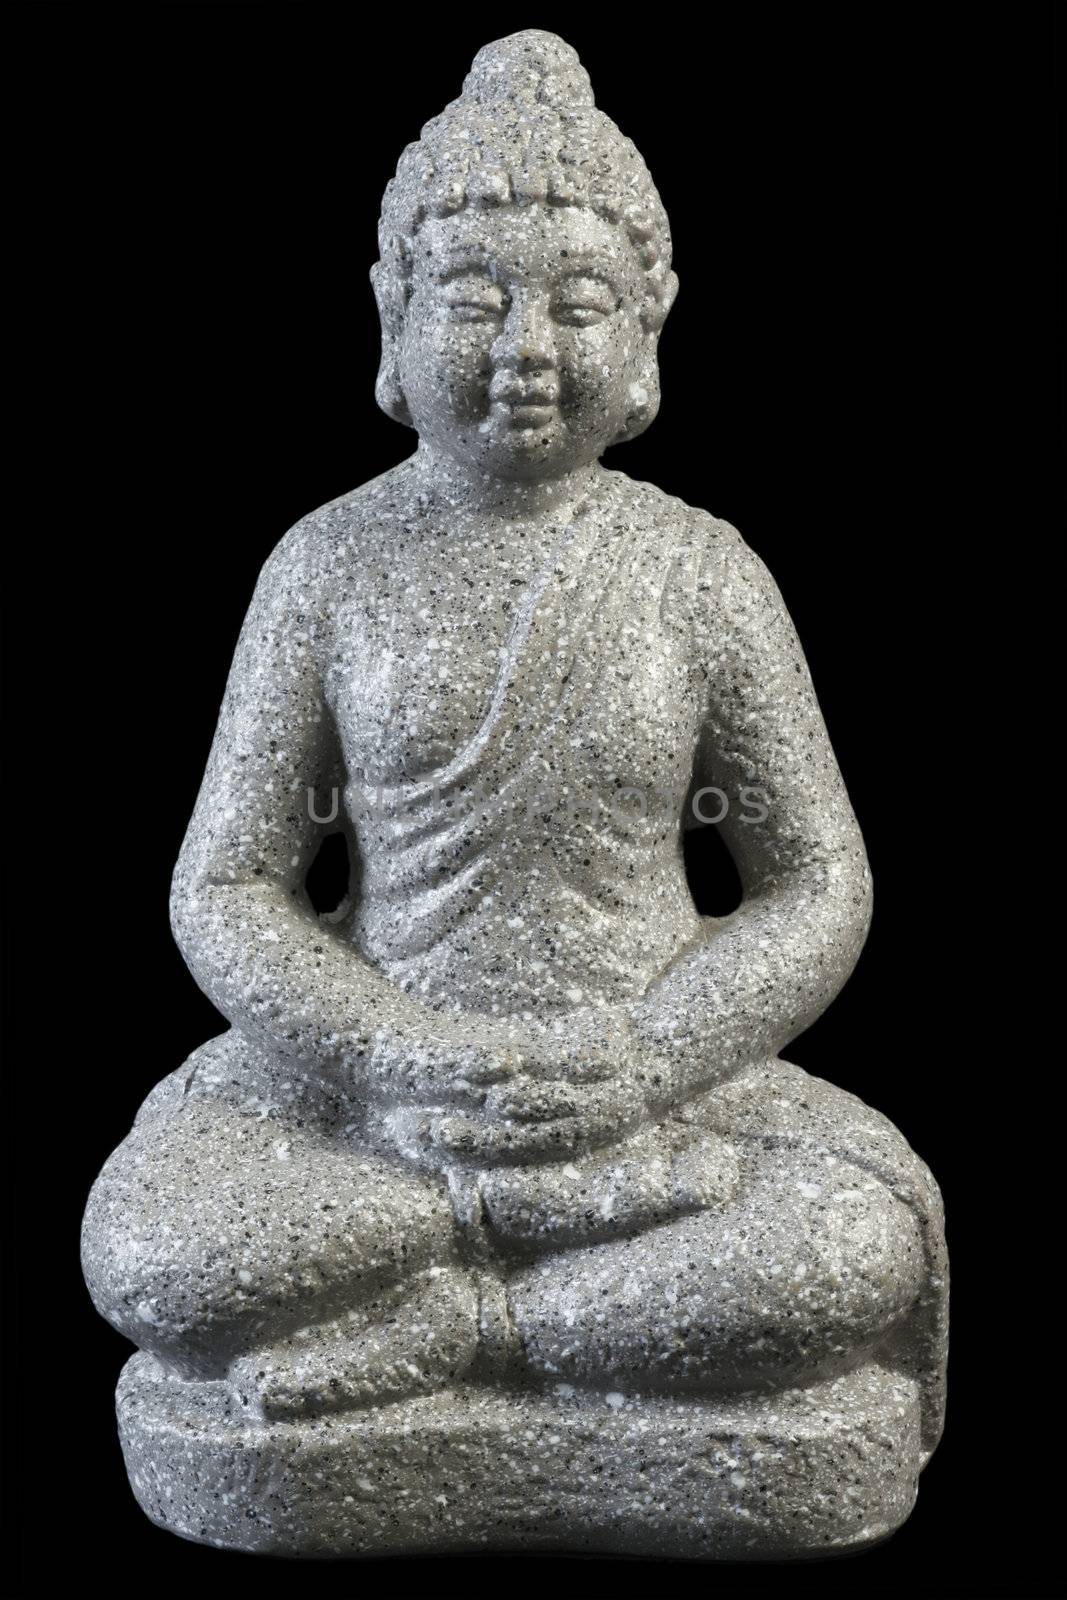 Buddha sculpture in lotus position - isolated on black background